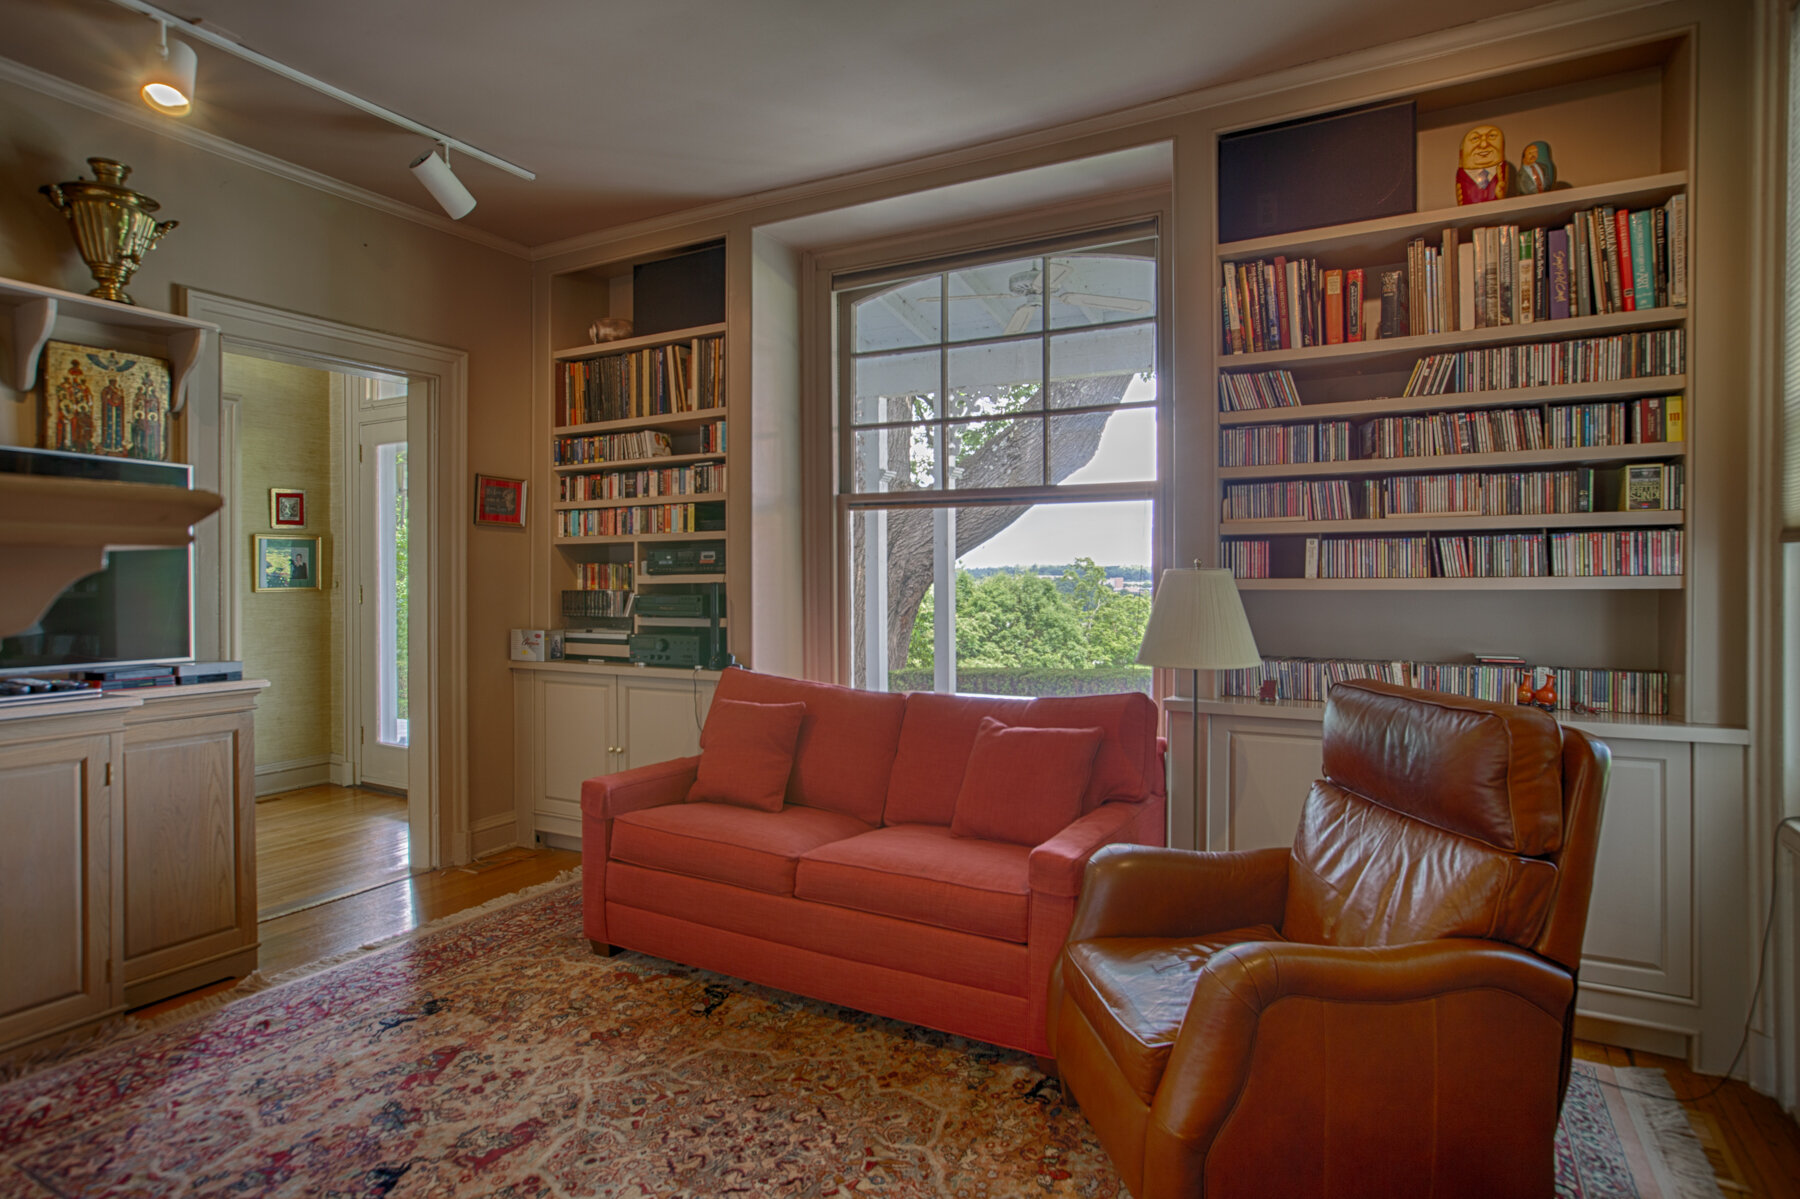  Built ins on the back wall that house many books. Red couch and a leather chair are in this room.. Would make for a great reading room. 